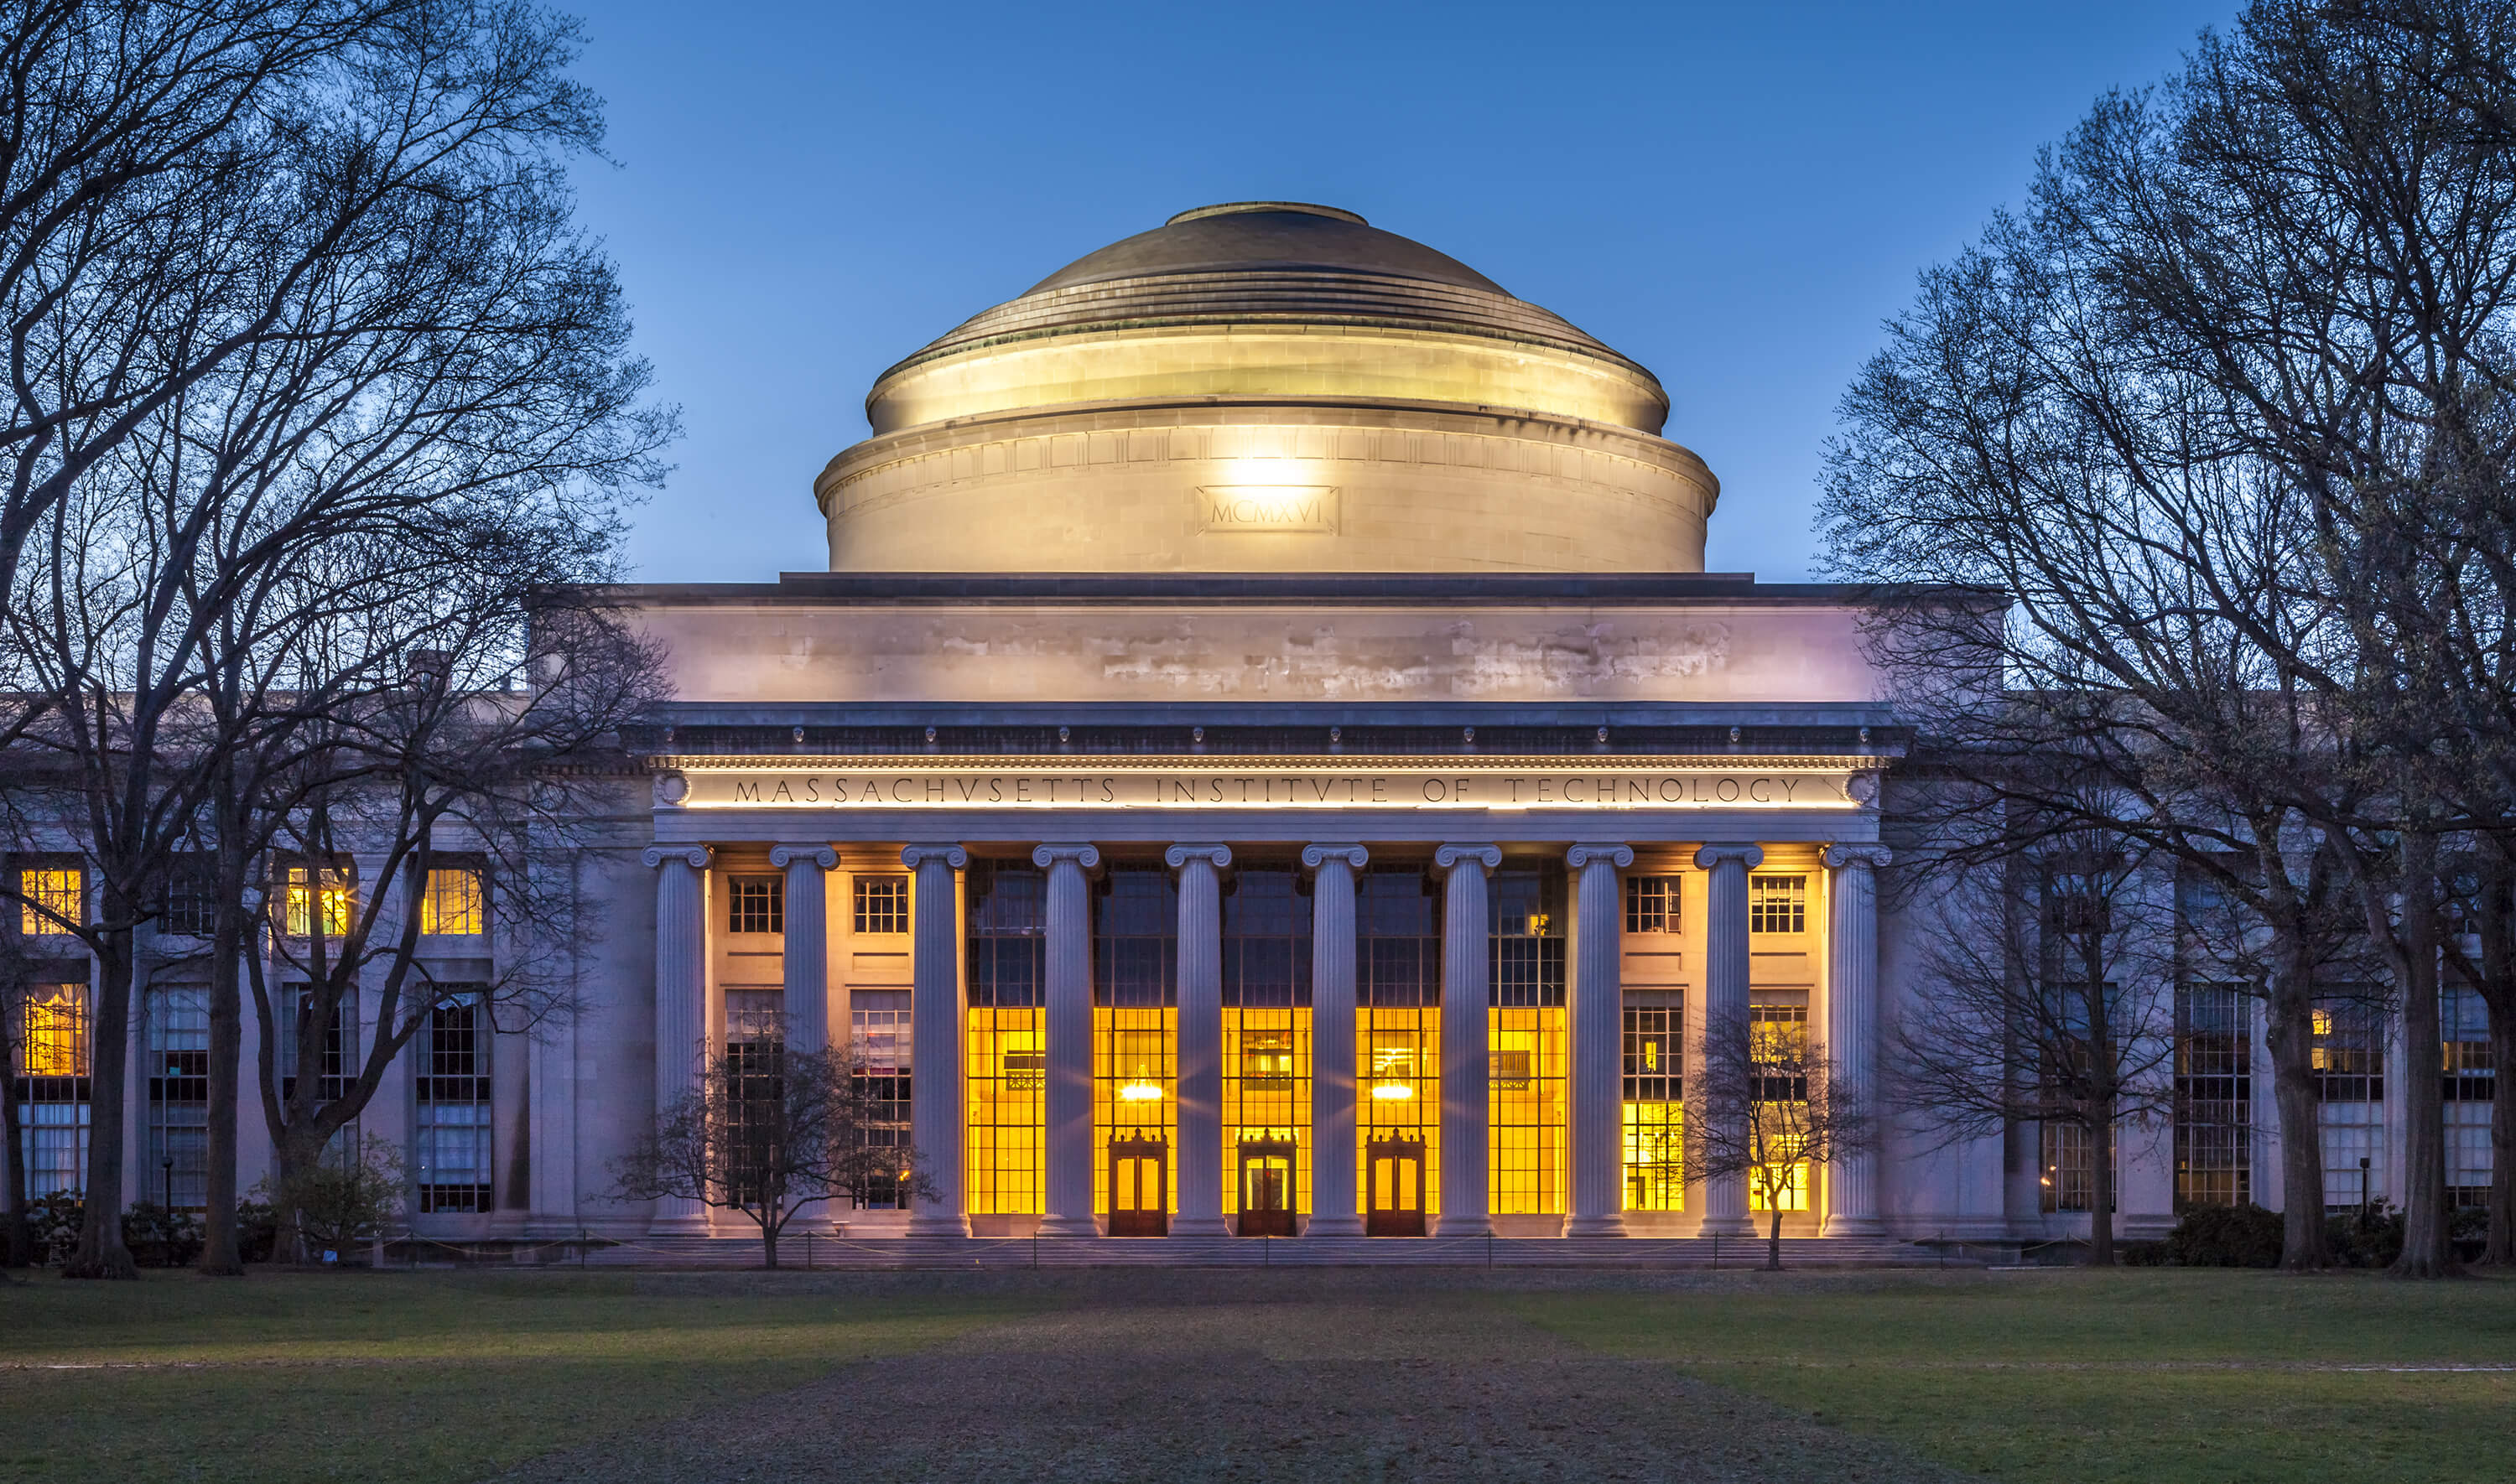 The famous Massachusetts Institute of Technology in Cambridge, MA, USA